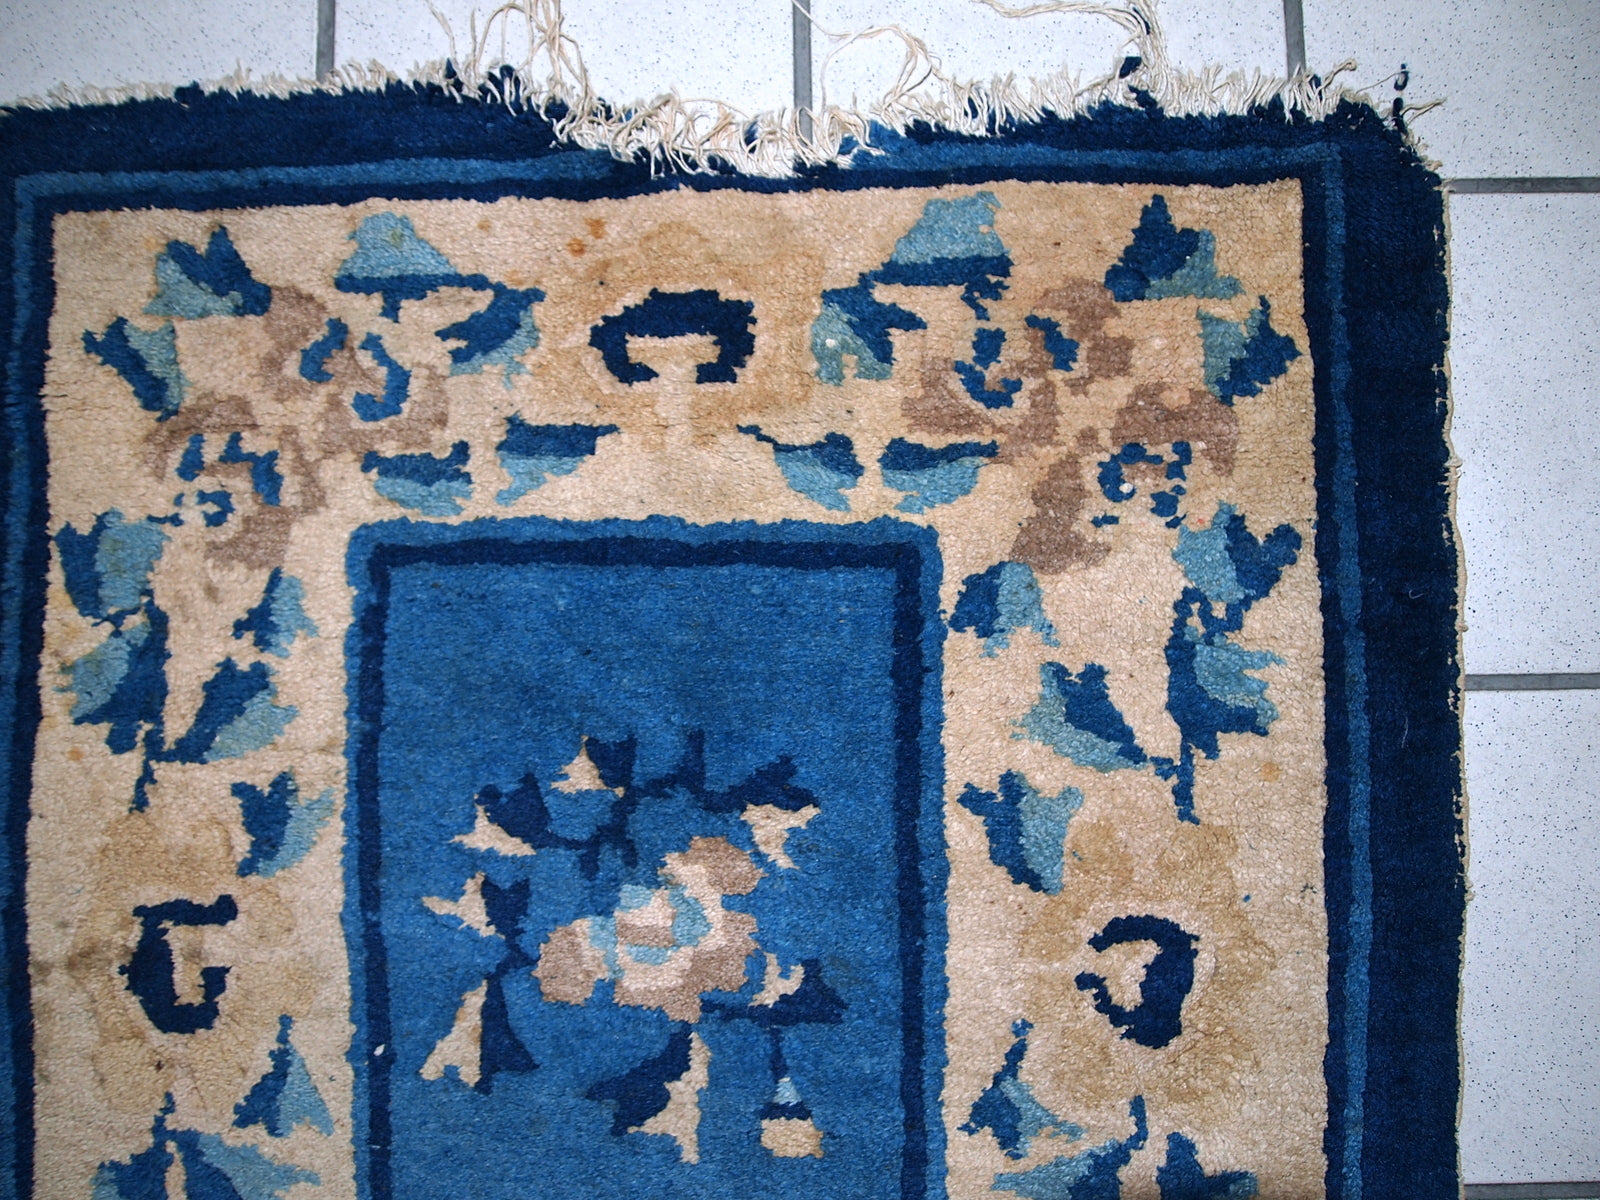 Detailed view of the rug's intricate design in navy blue and beige